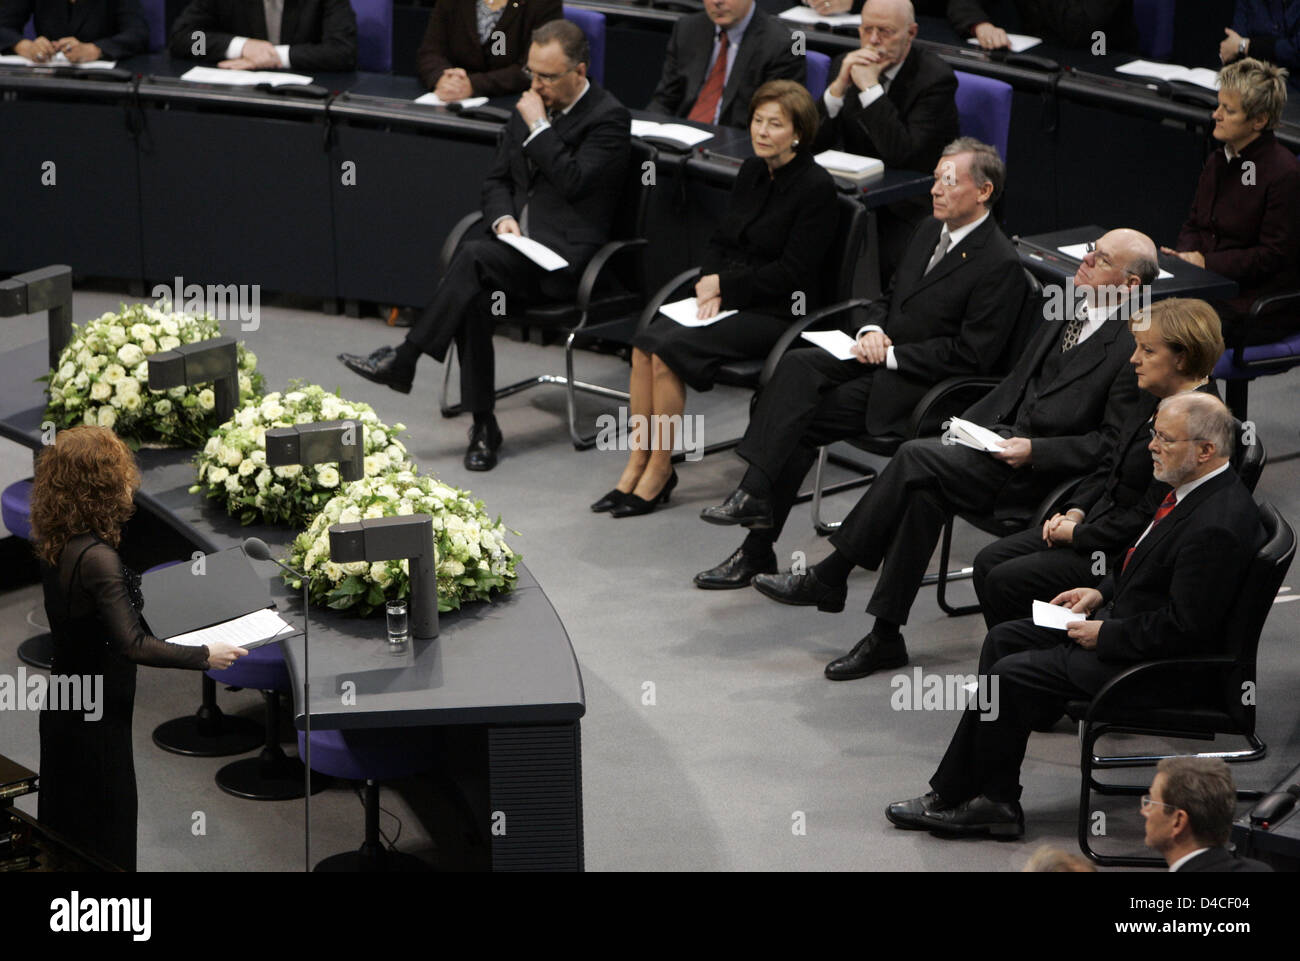 Ilse Weber (L) performs in the presence of Prime Minister of Mecklenburg Vorpommern Harald Ringstorff (R-L), German Chancellor Angela Merkel, the President of the Bundestag Norbert Lammert, German President Horst Koehler, his wife Eva and the President of the Federal Constitutional Court  Hans-Juergen Papier  during a commemoration ceremony at the Bundestag in Berlin, 25 January 20 Stock Photo